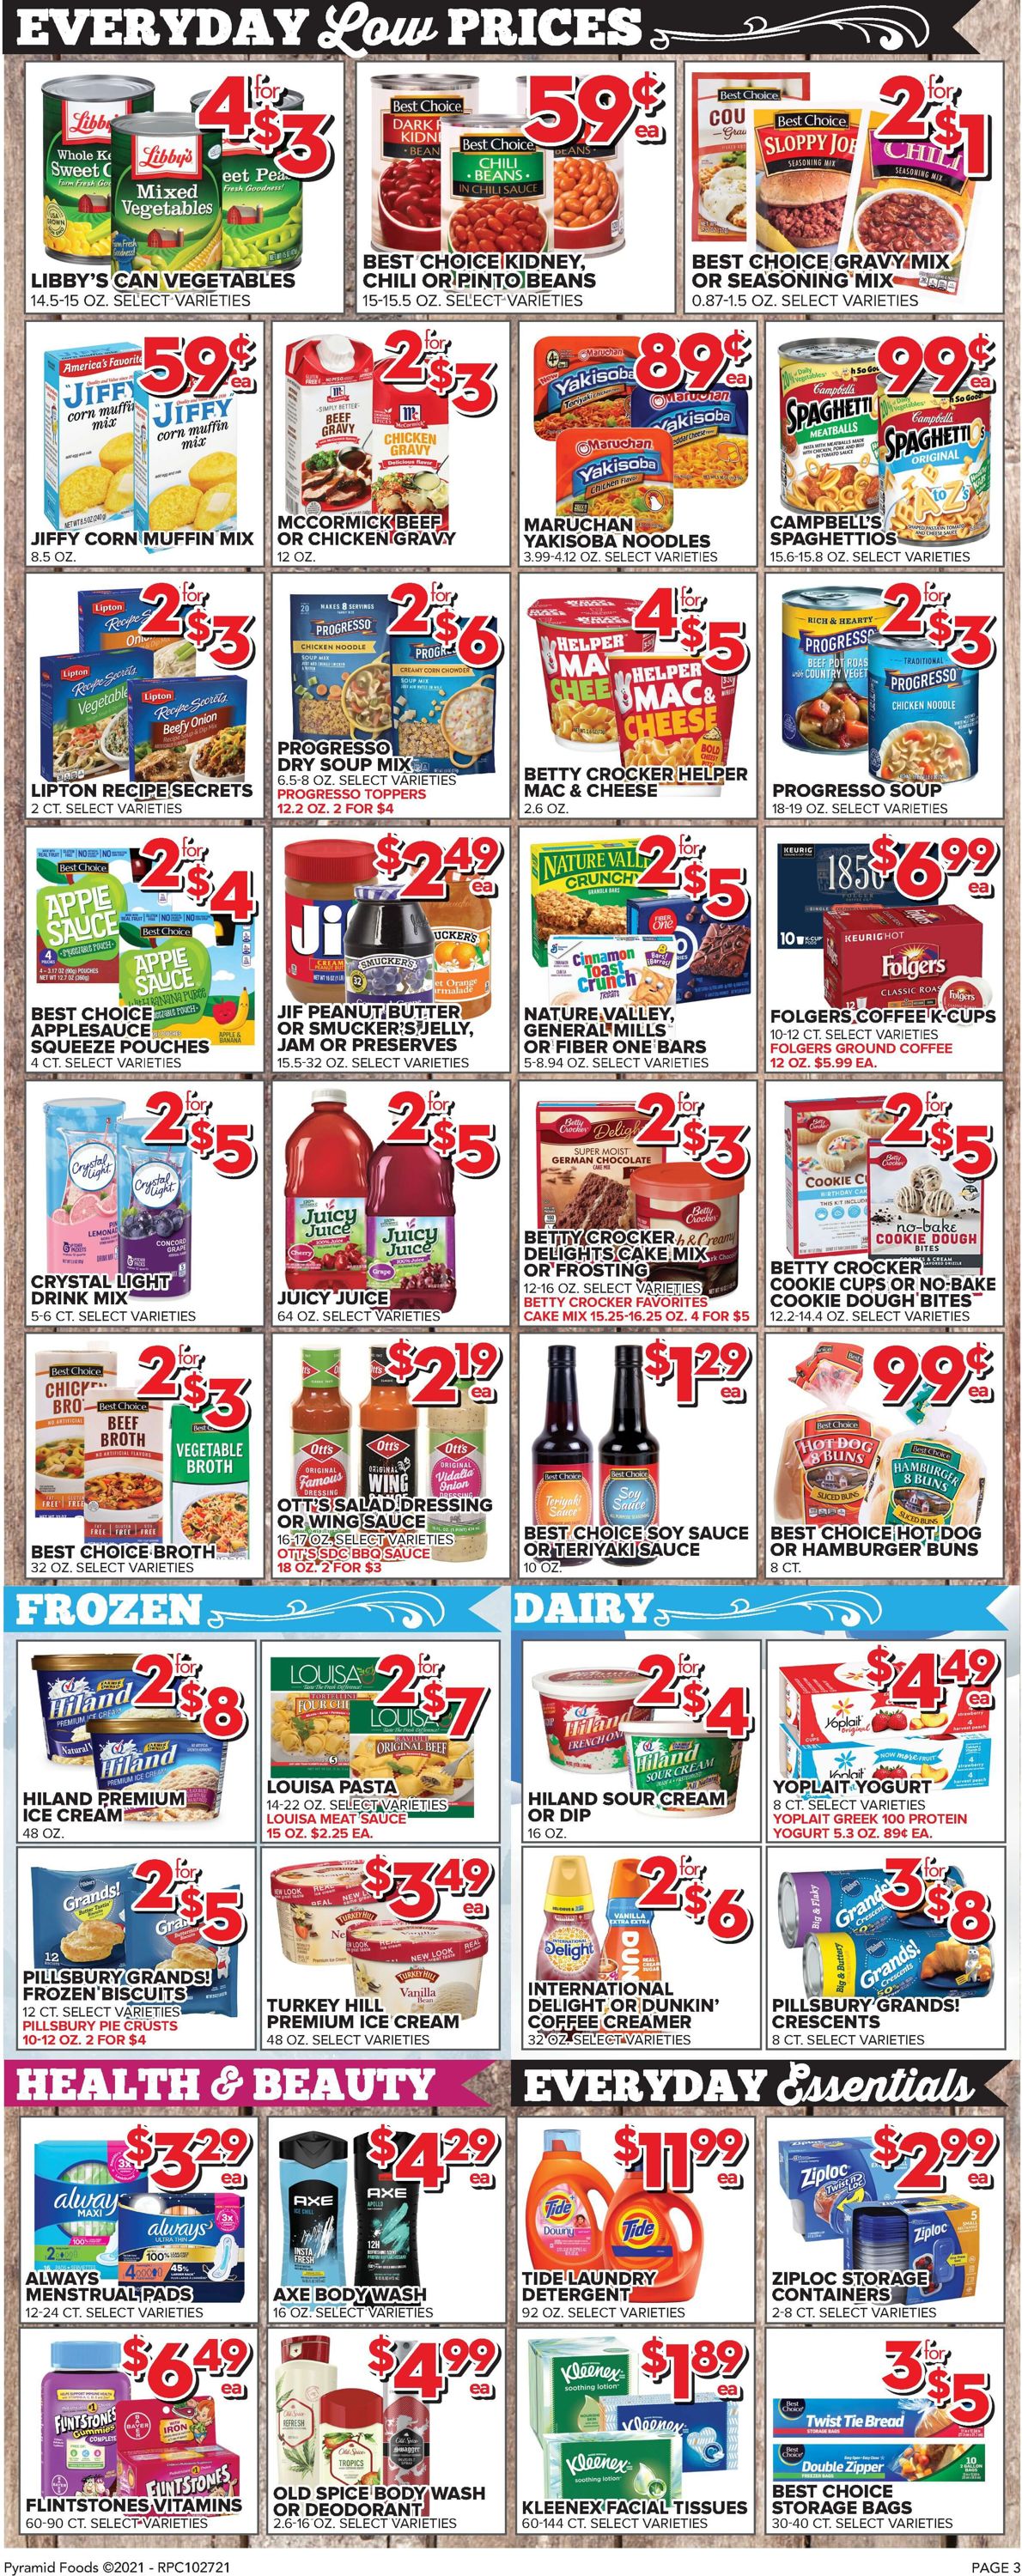 Price Cutter HALLOWEEN 2021 Weekly Ad Circular - valid 10/27-11/02/2021 (Page 3)